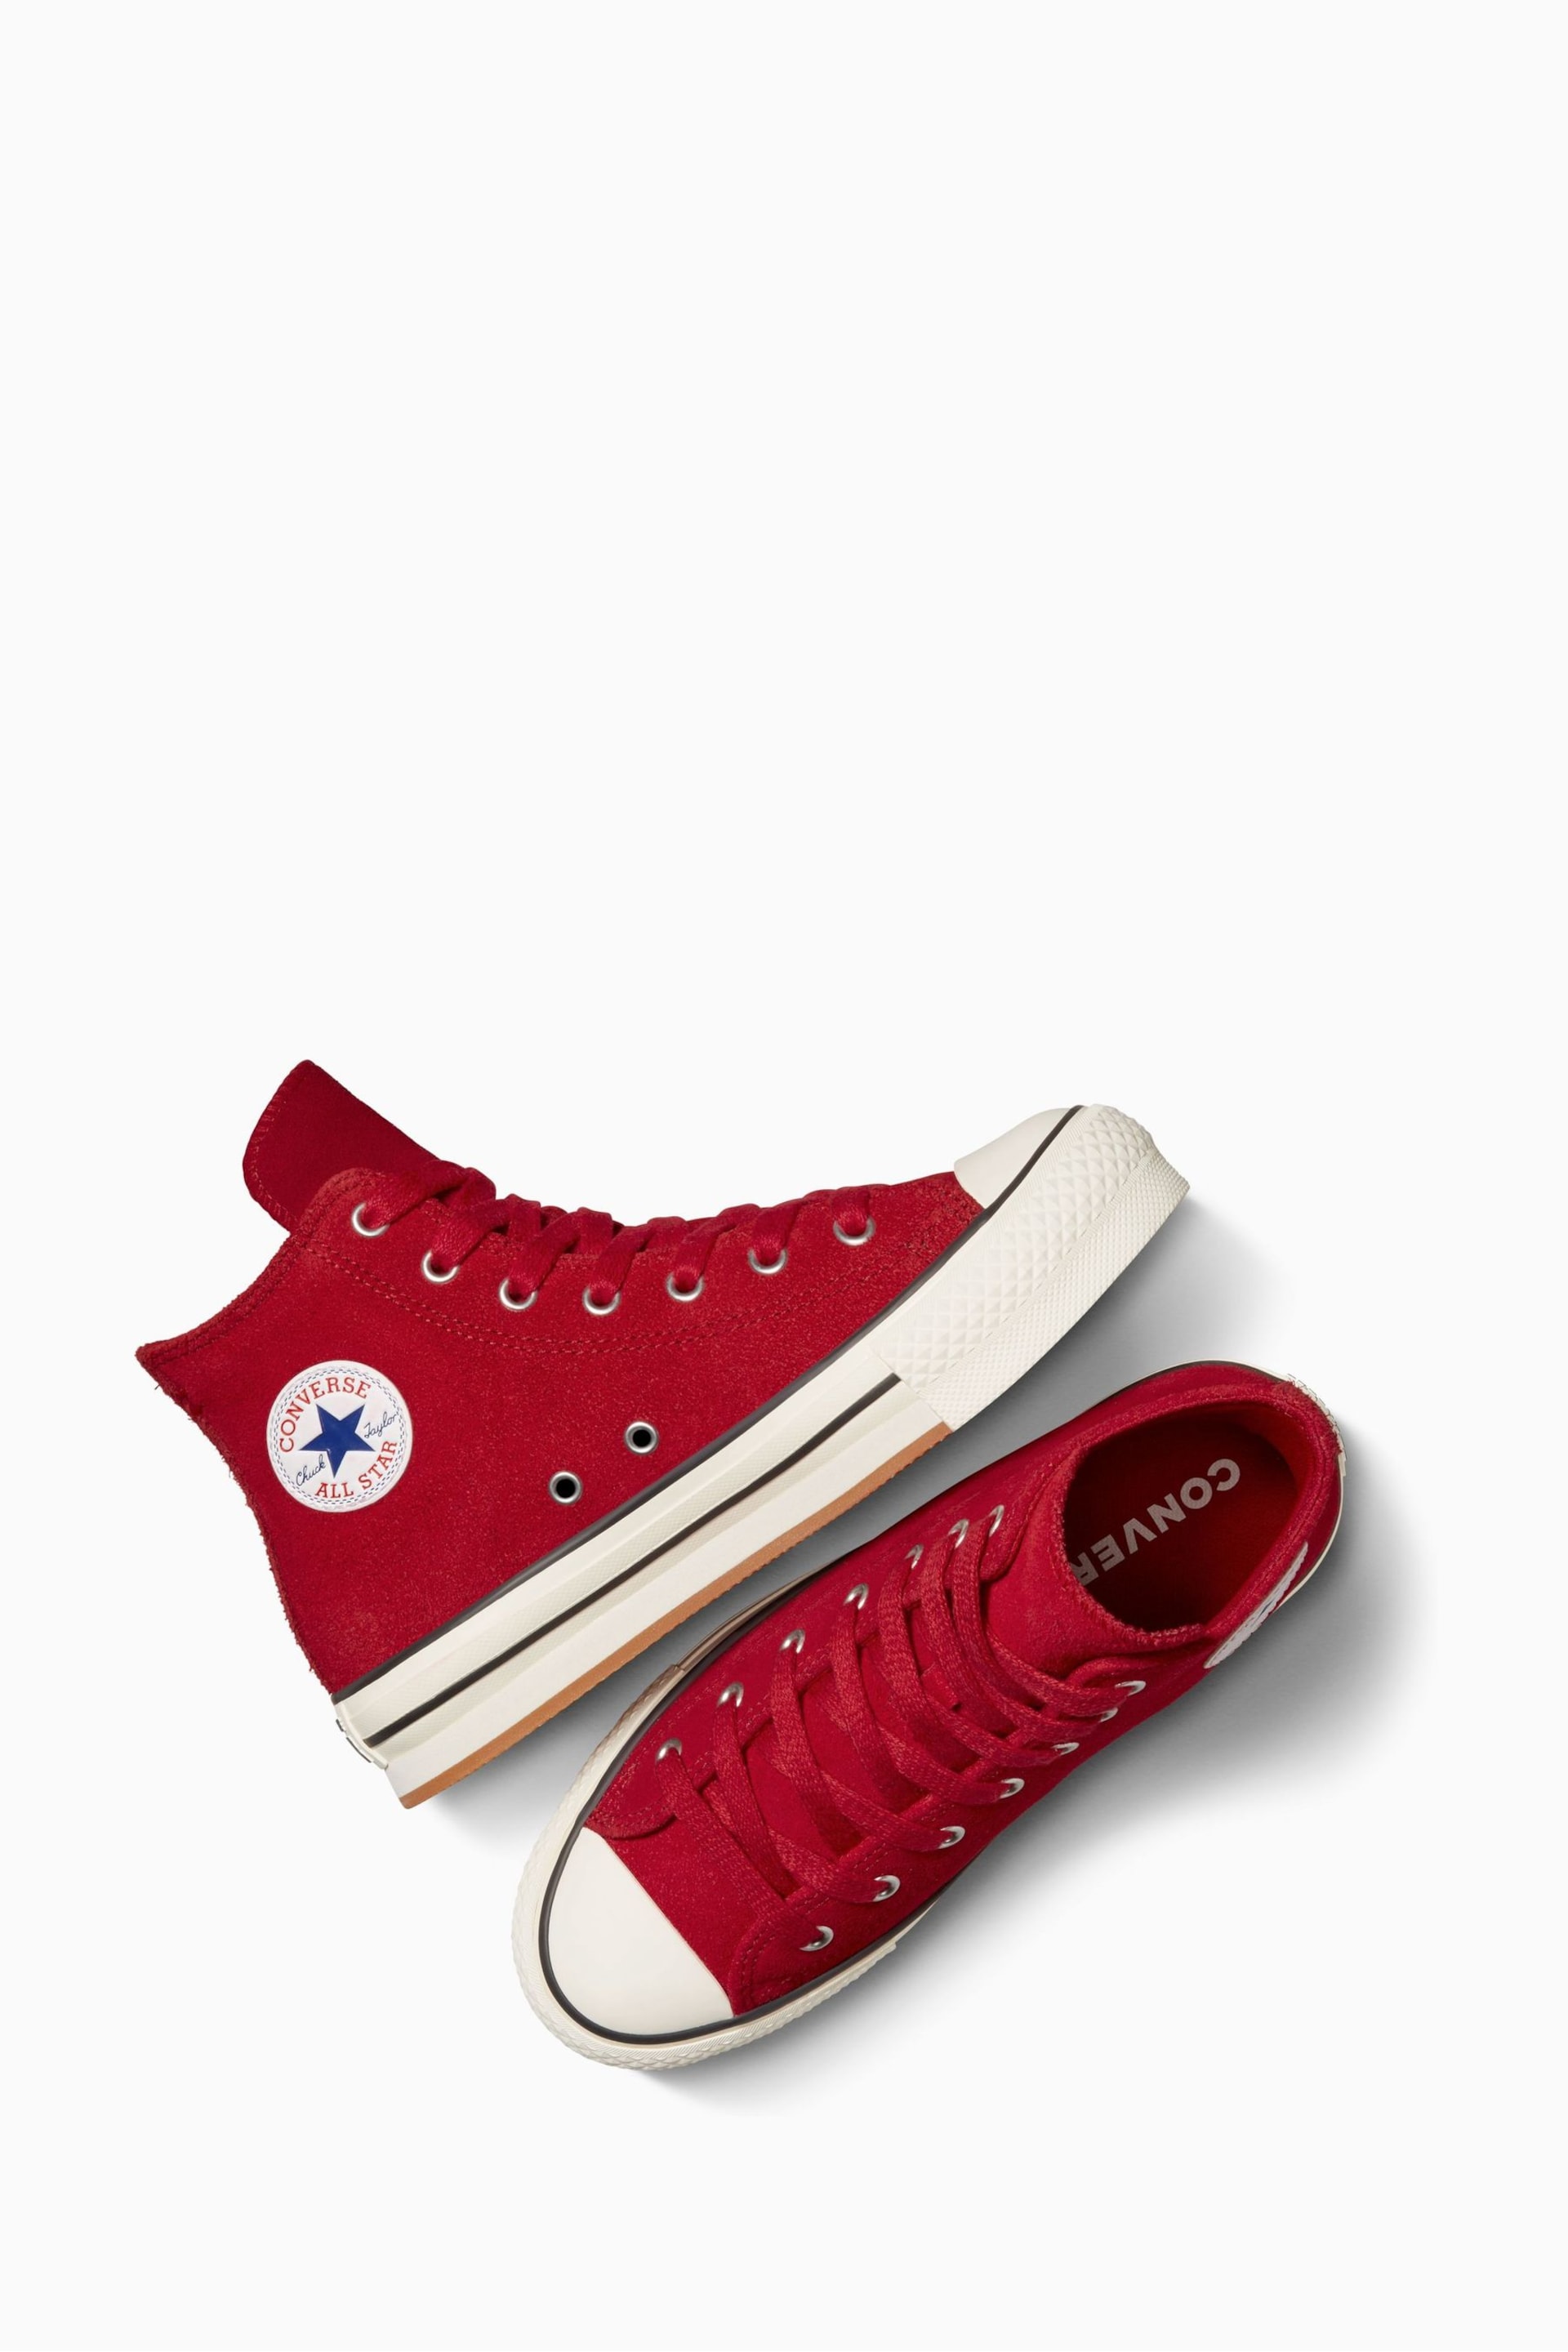 Converse Red Youth All Star EVA Lift Trainers - Image 6 of 9